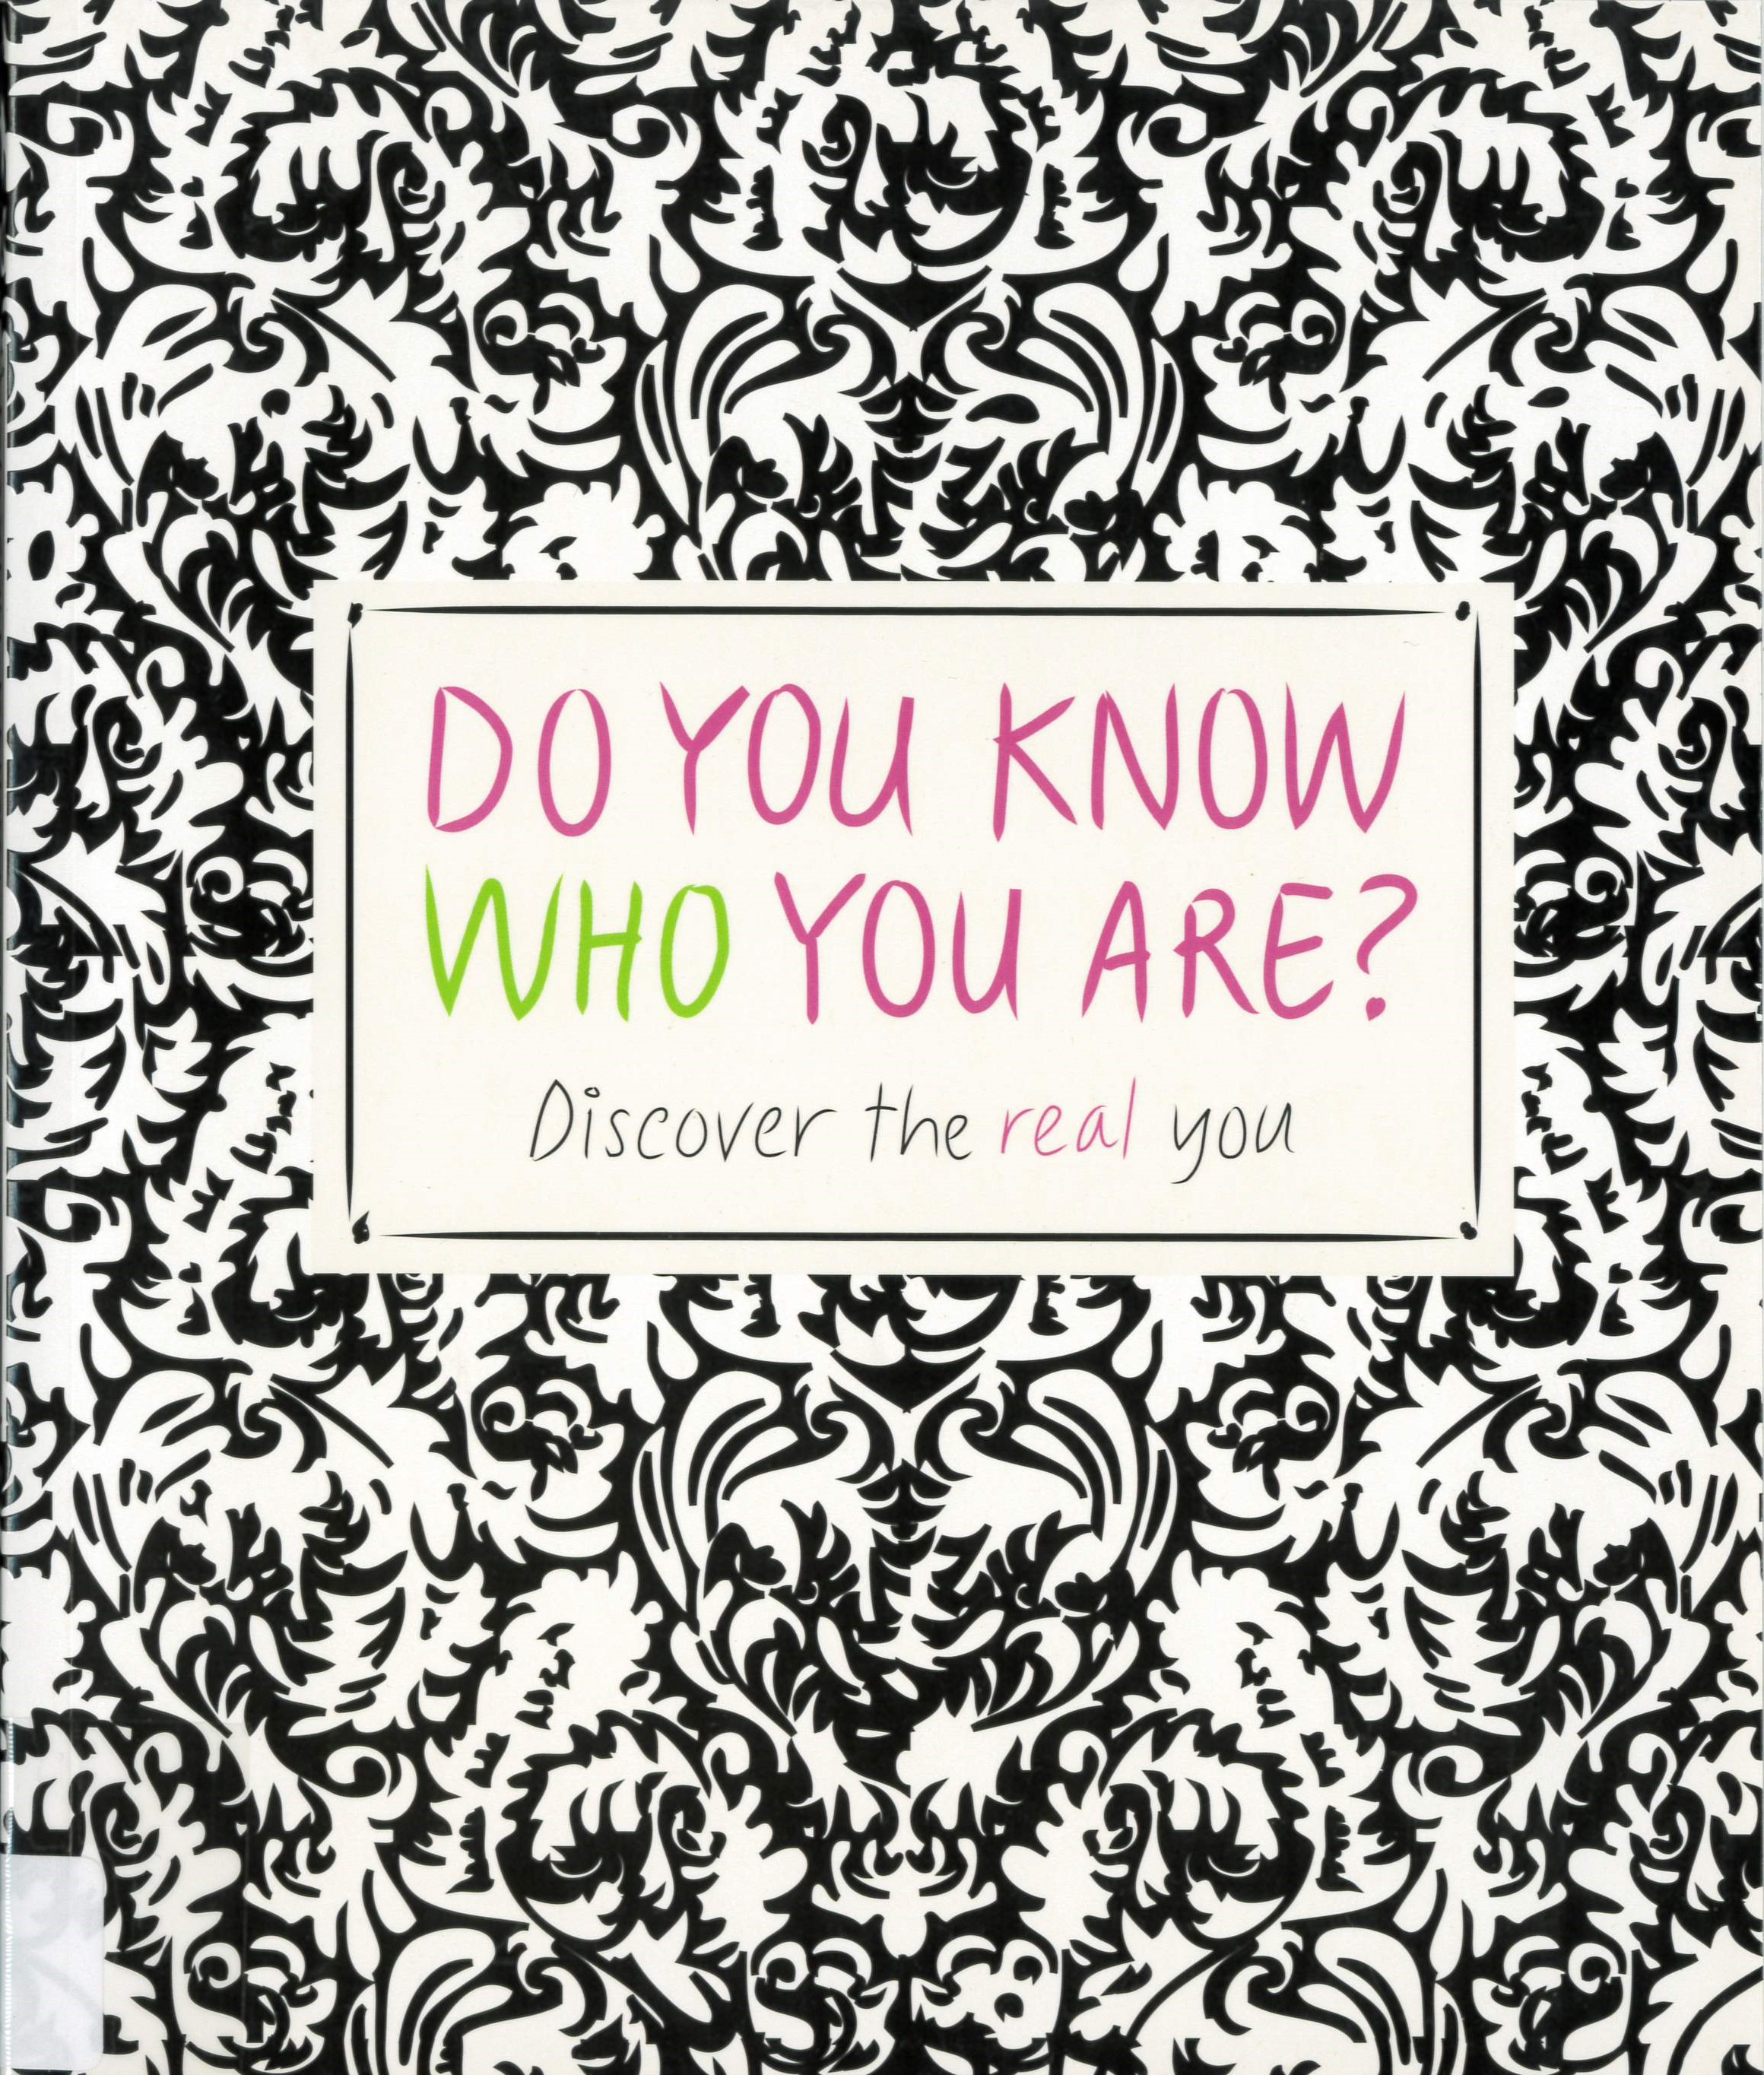 Do you know who you are? discover the real you